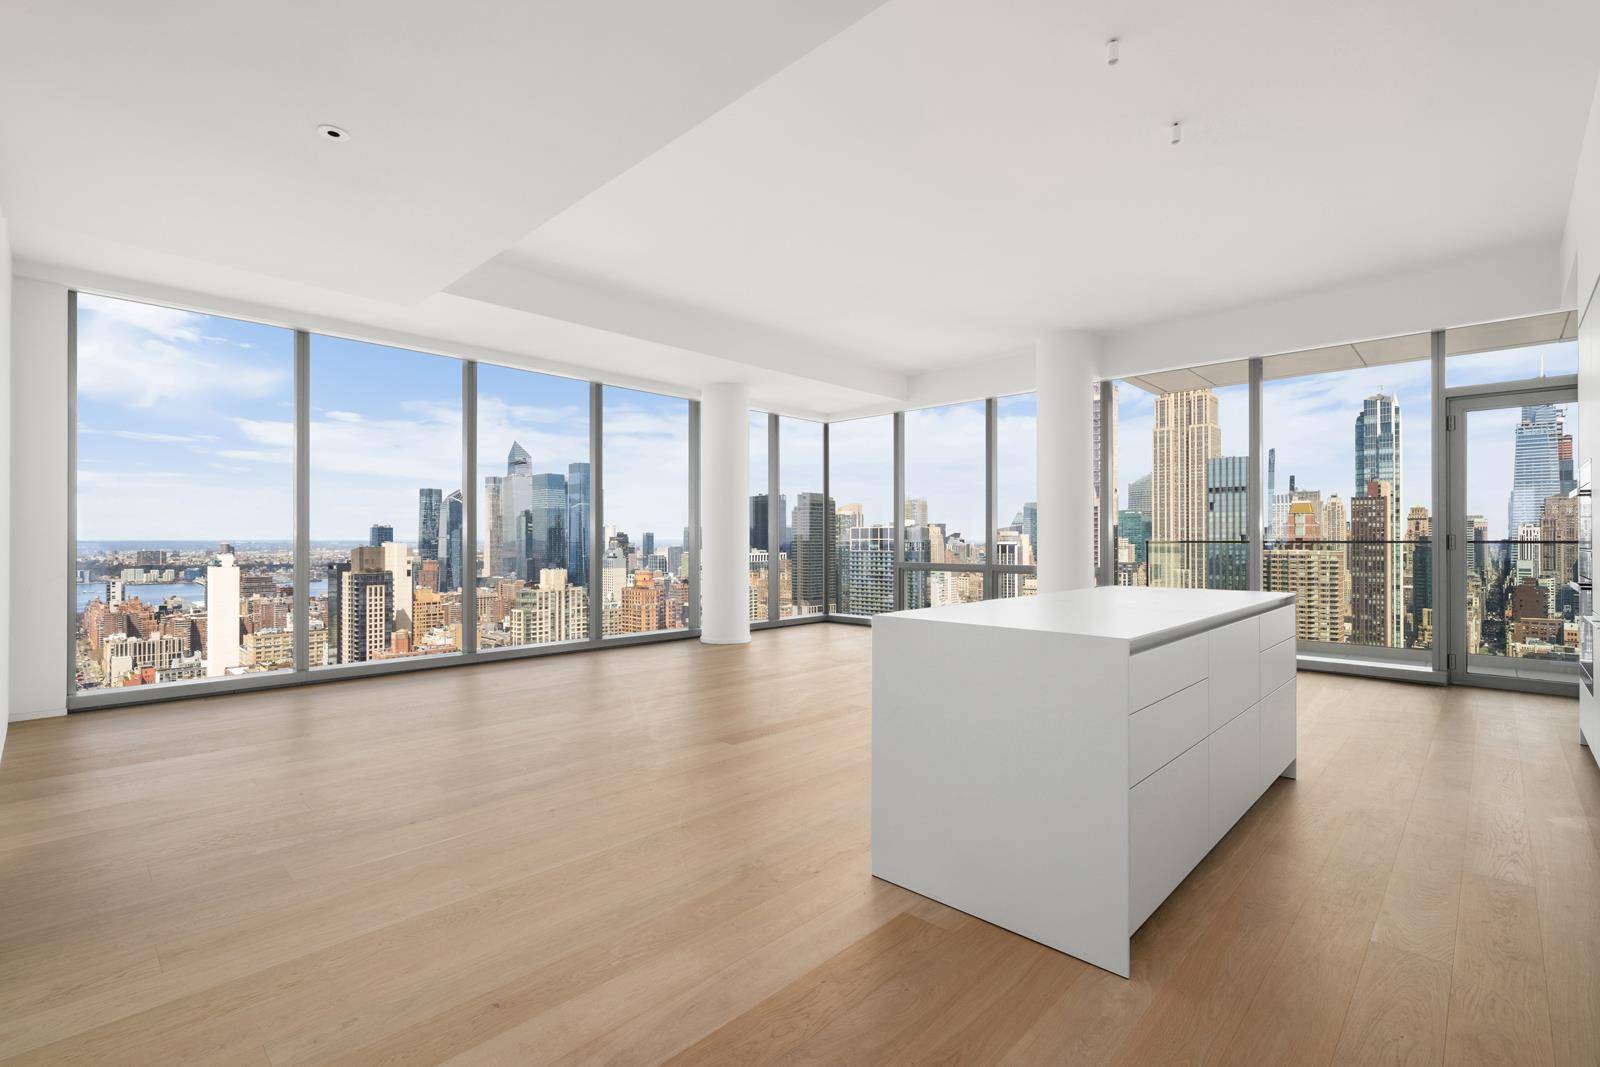 Perched above Madison Square Park, this remarkable full floor residence offers breathtaking panoramic views of several iconic New York City landmarks, including the Empire State Building and the Metropolitan Life ...